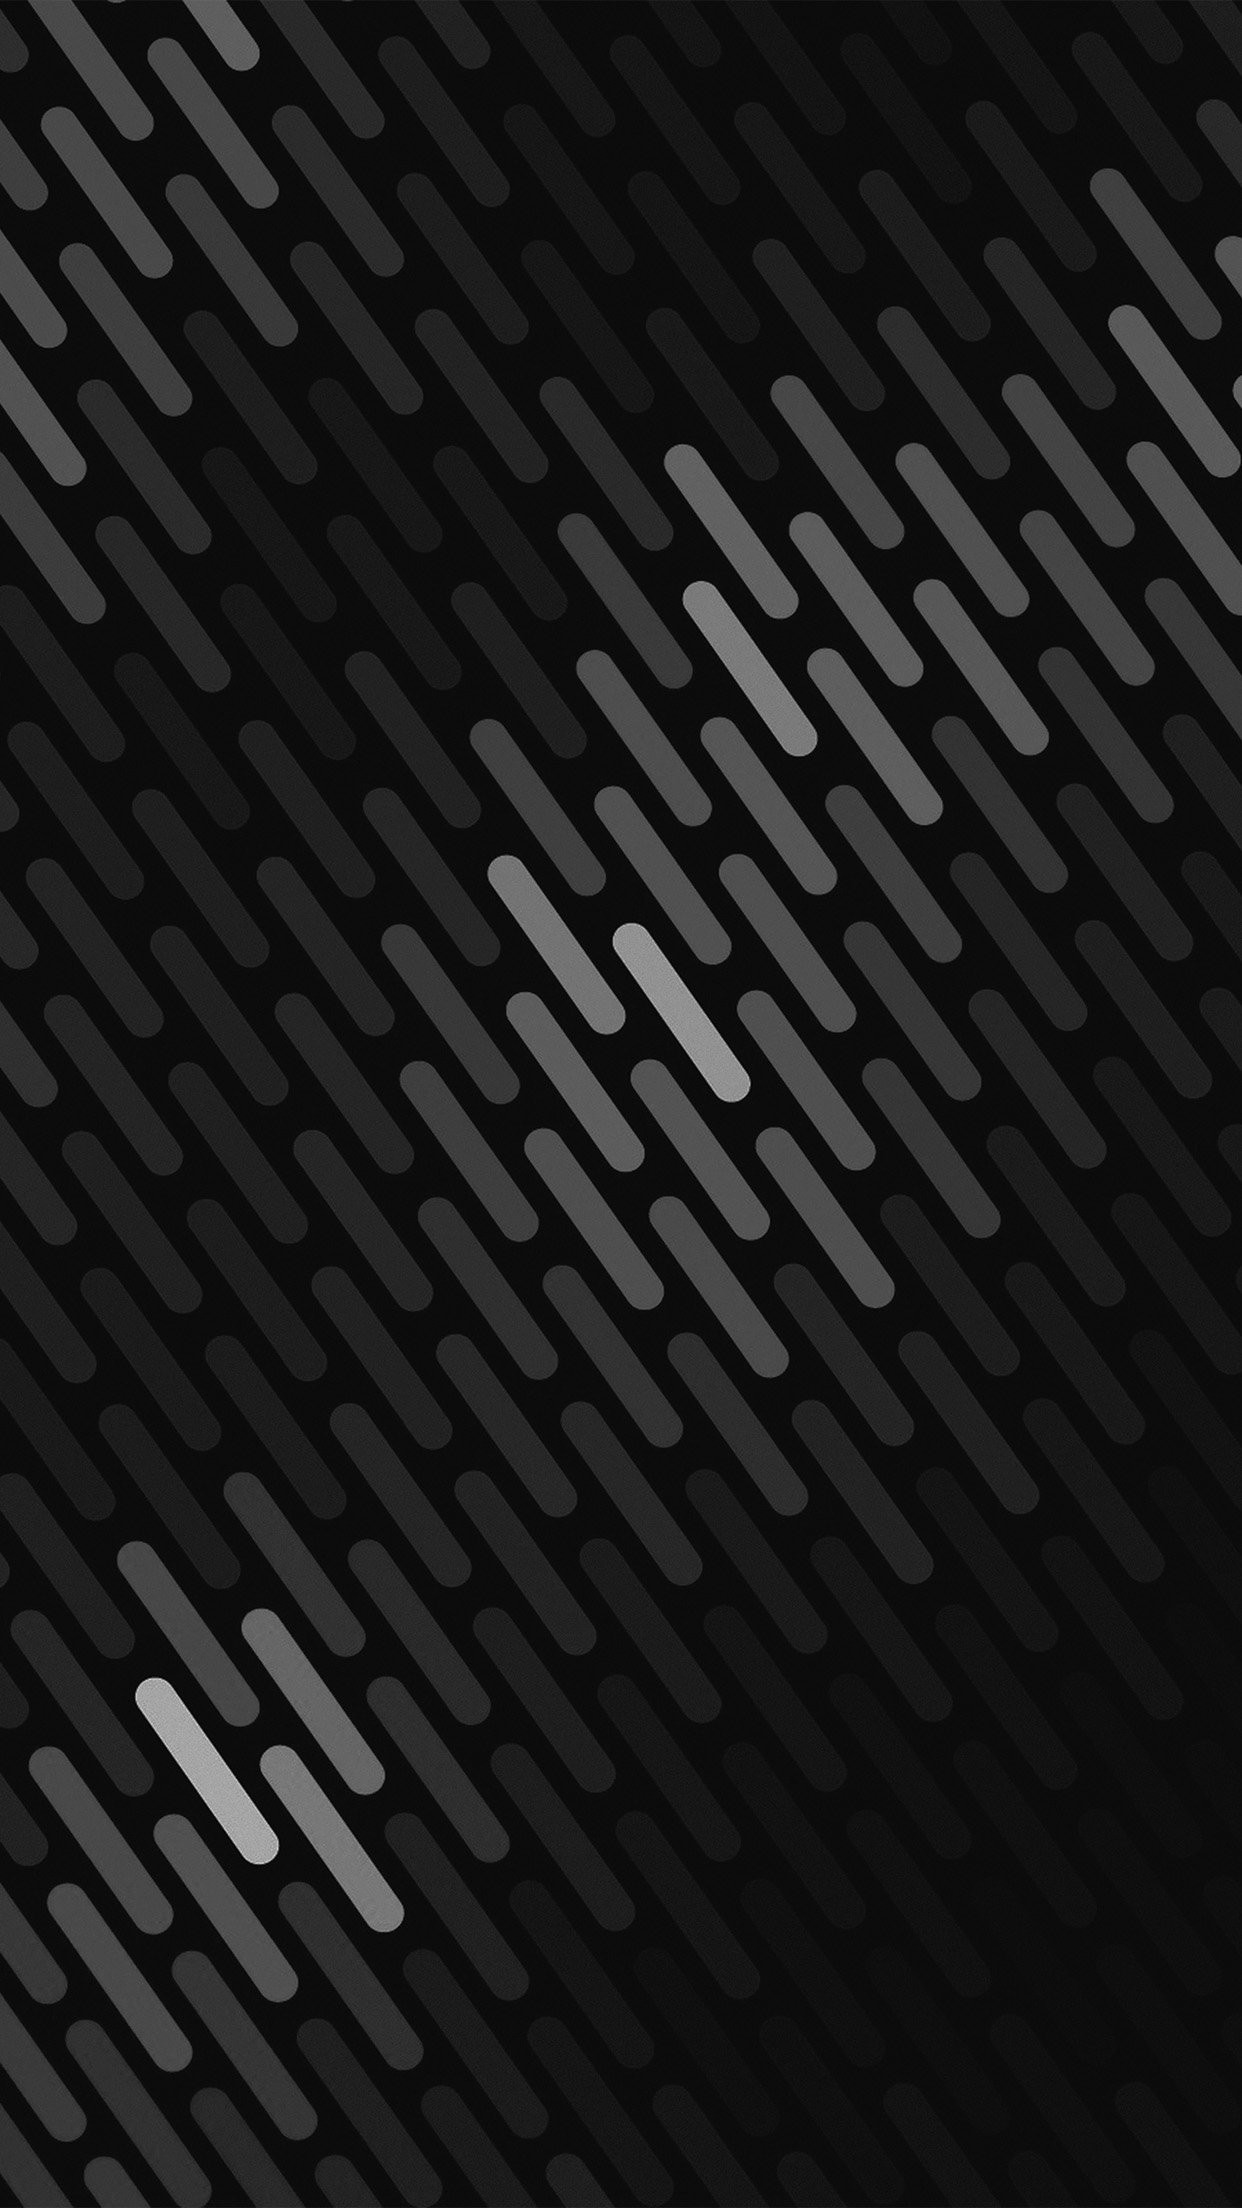 1242x2208, Cool Abstract Dark Bw Dots Lines Pattern - Black Wallpaper Abstract Hd , HD Wallpaper & Backgrounds